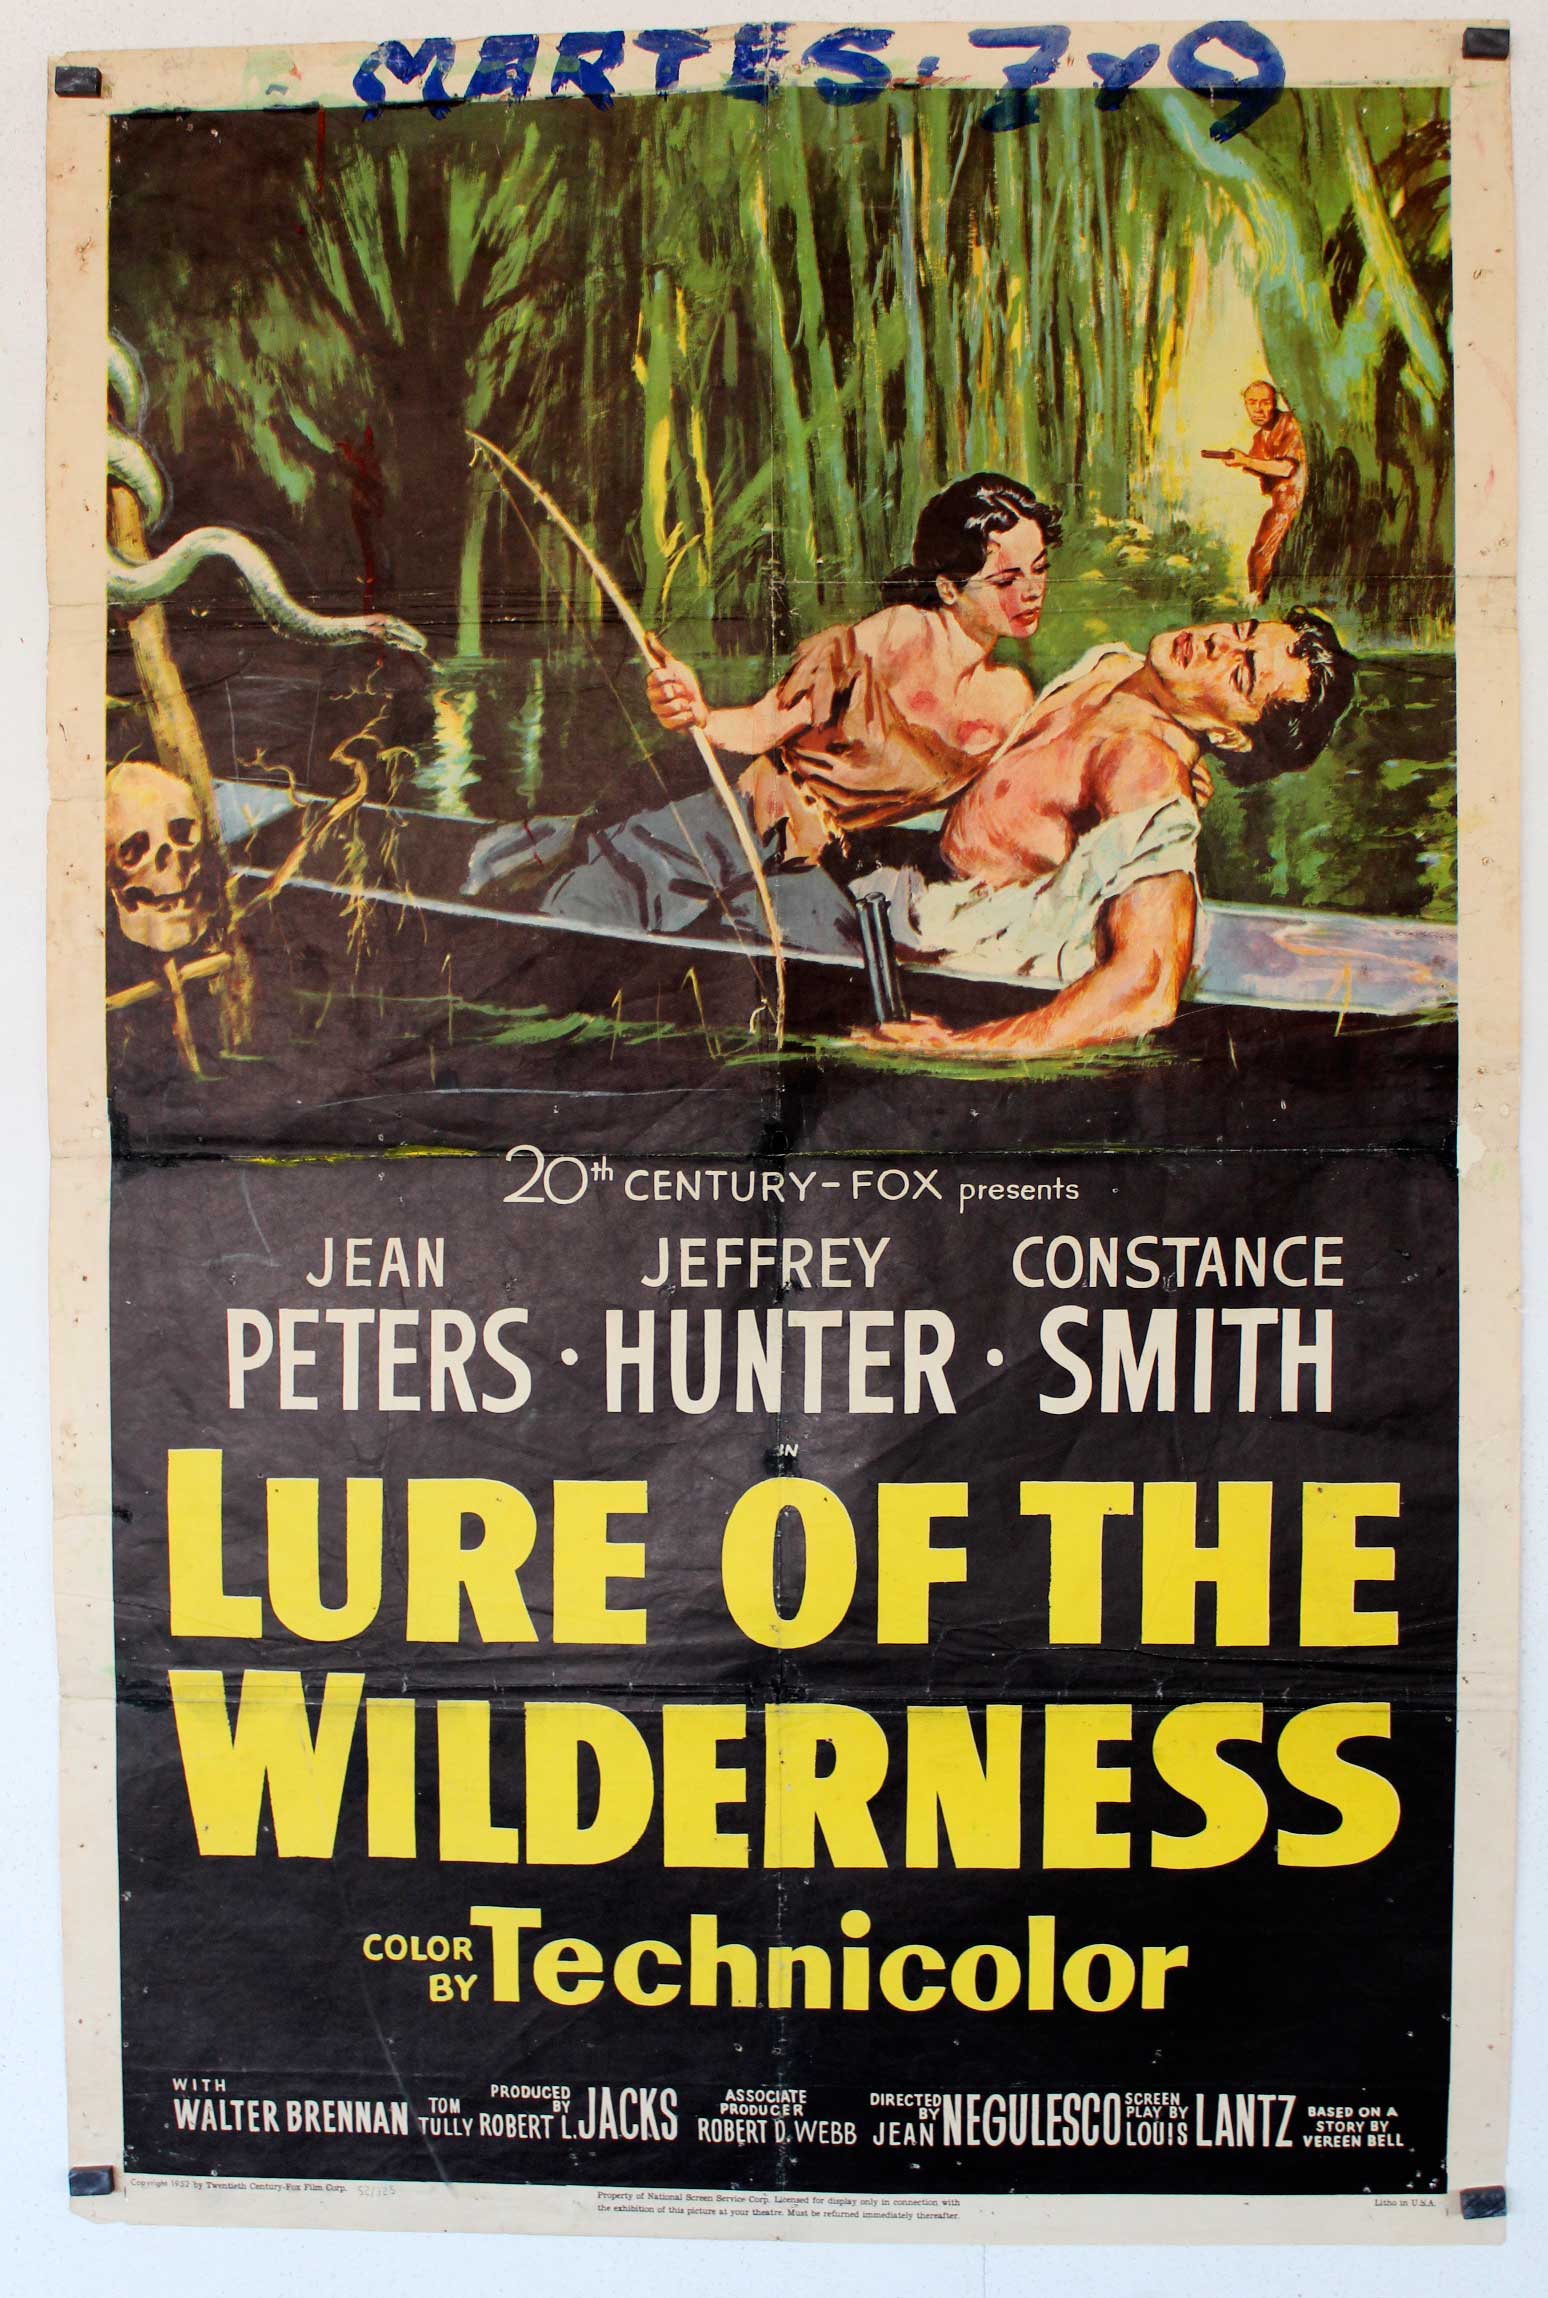 LURE OF THE WILDERNESS